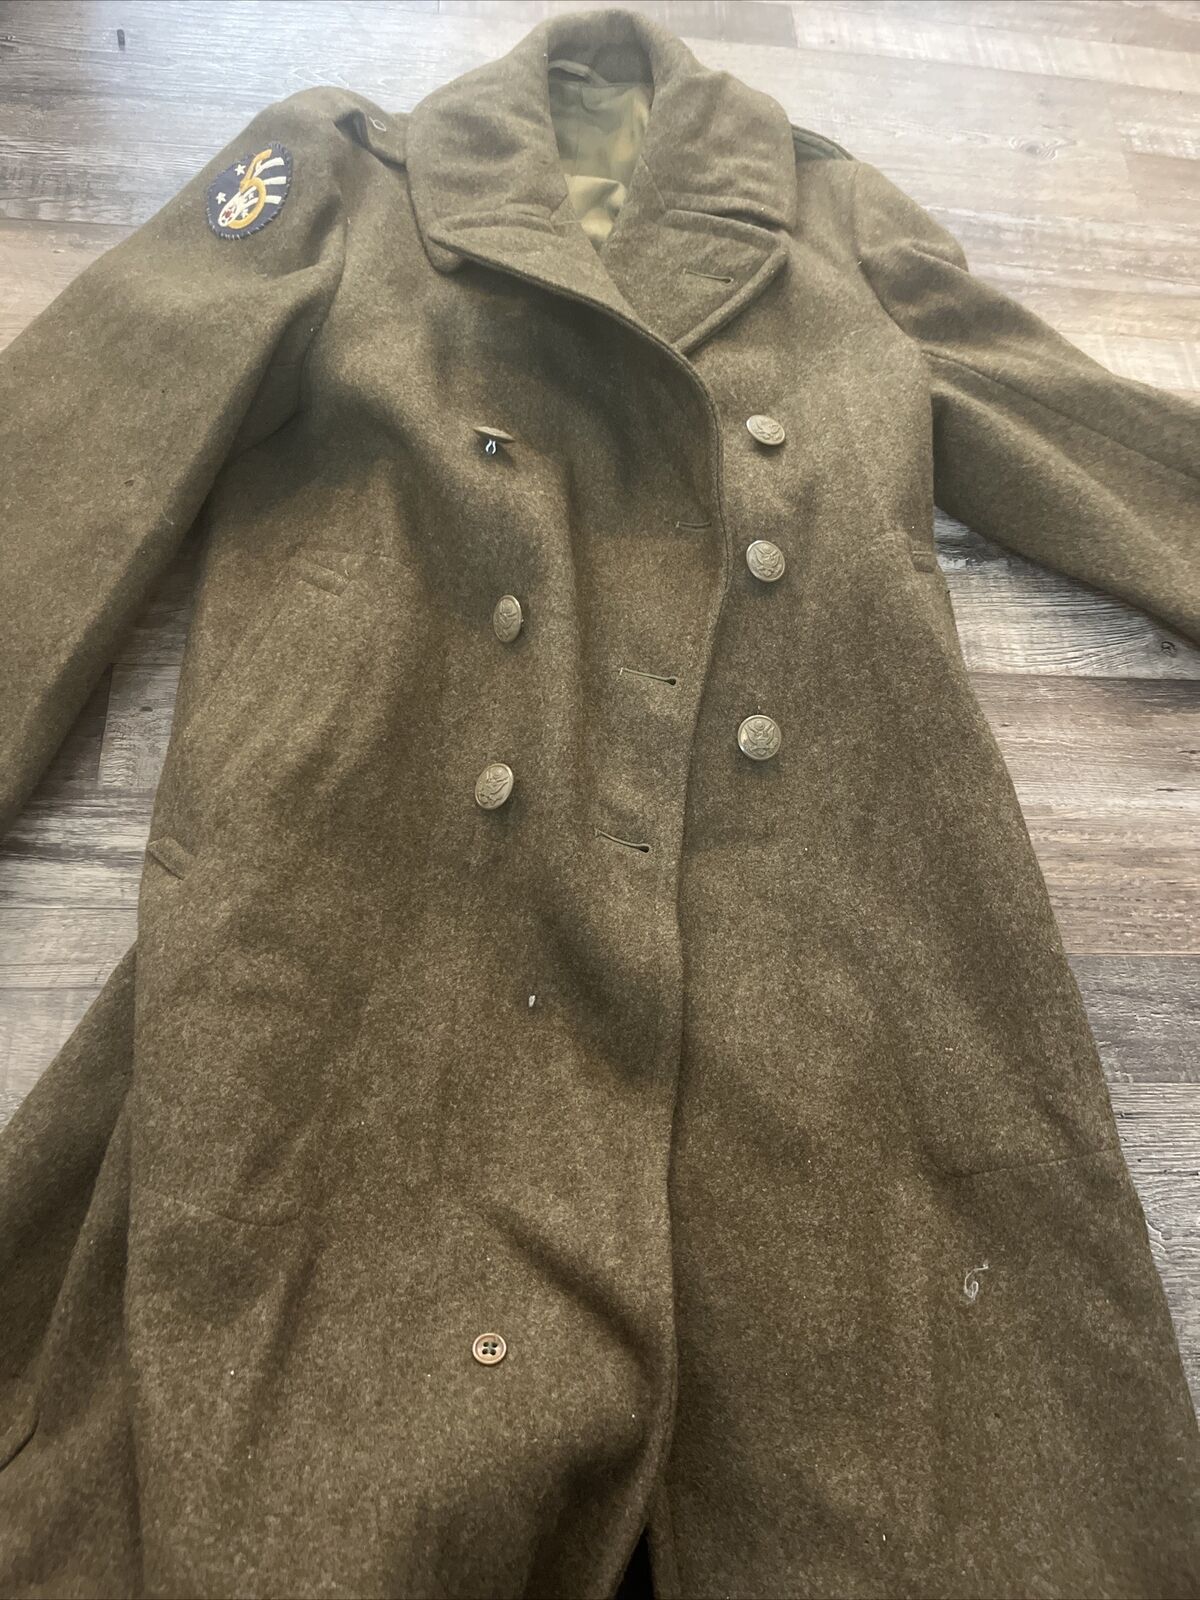 WW2 US Army Green Wool Military Trench Coat Vintage 40s Mens Long Overcoat 38R